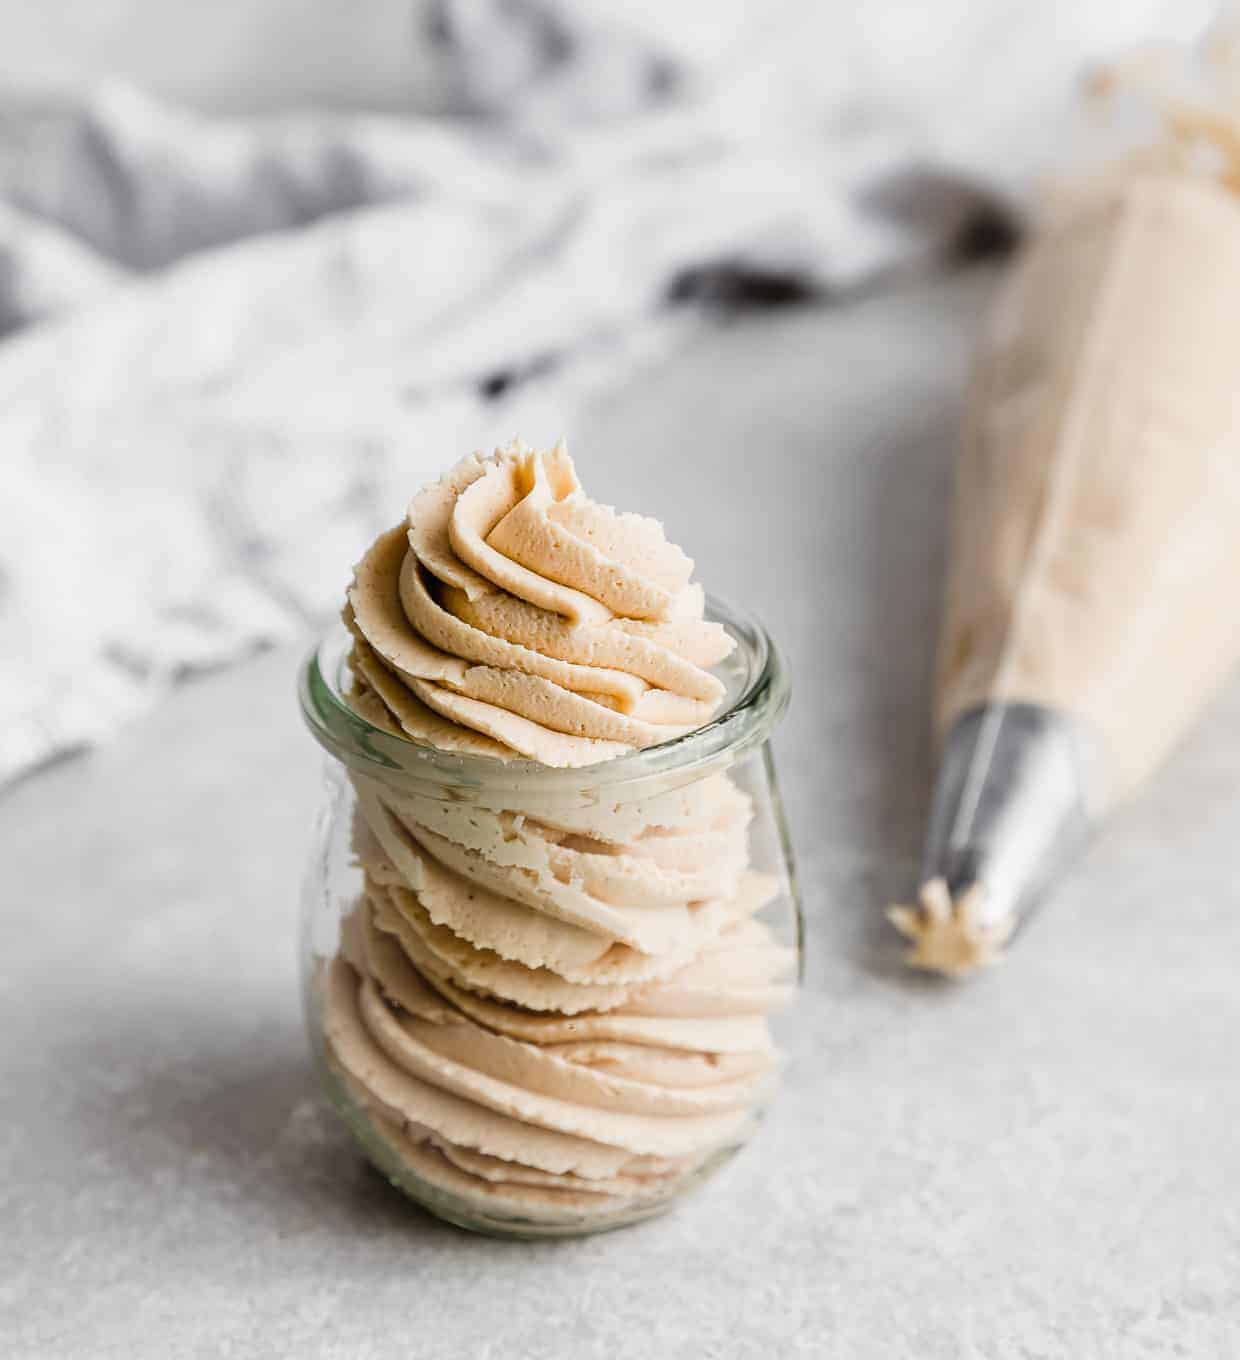 Peanut Butter Frosting piped into a small glass jar on a white background.